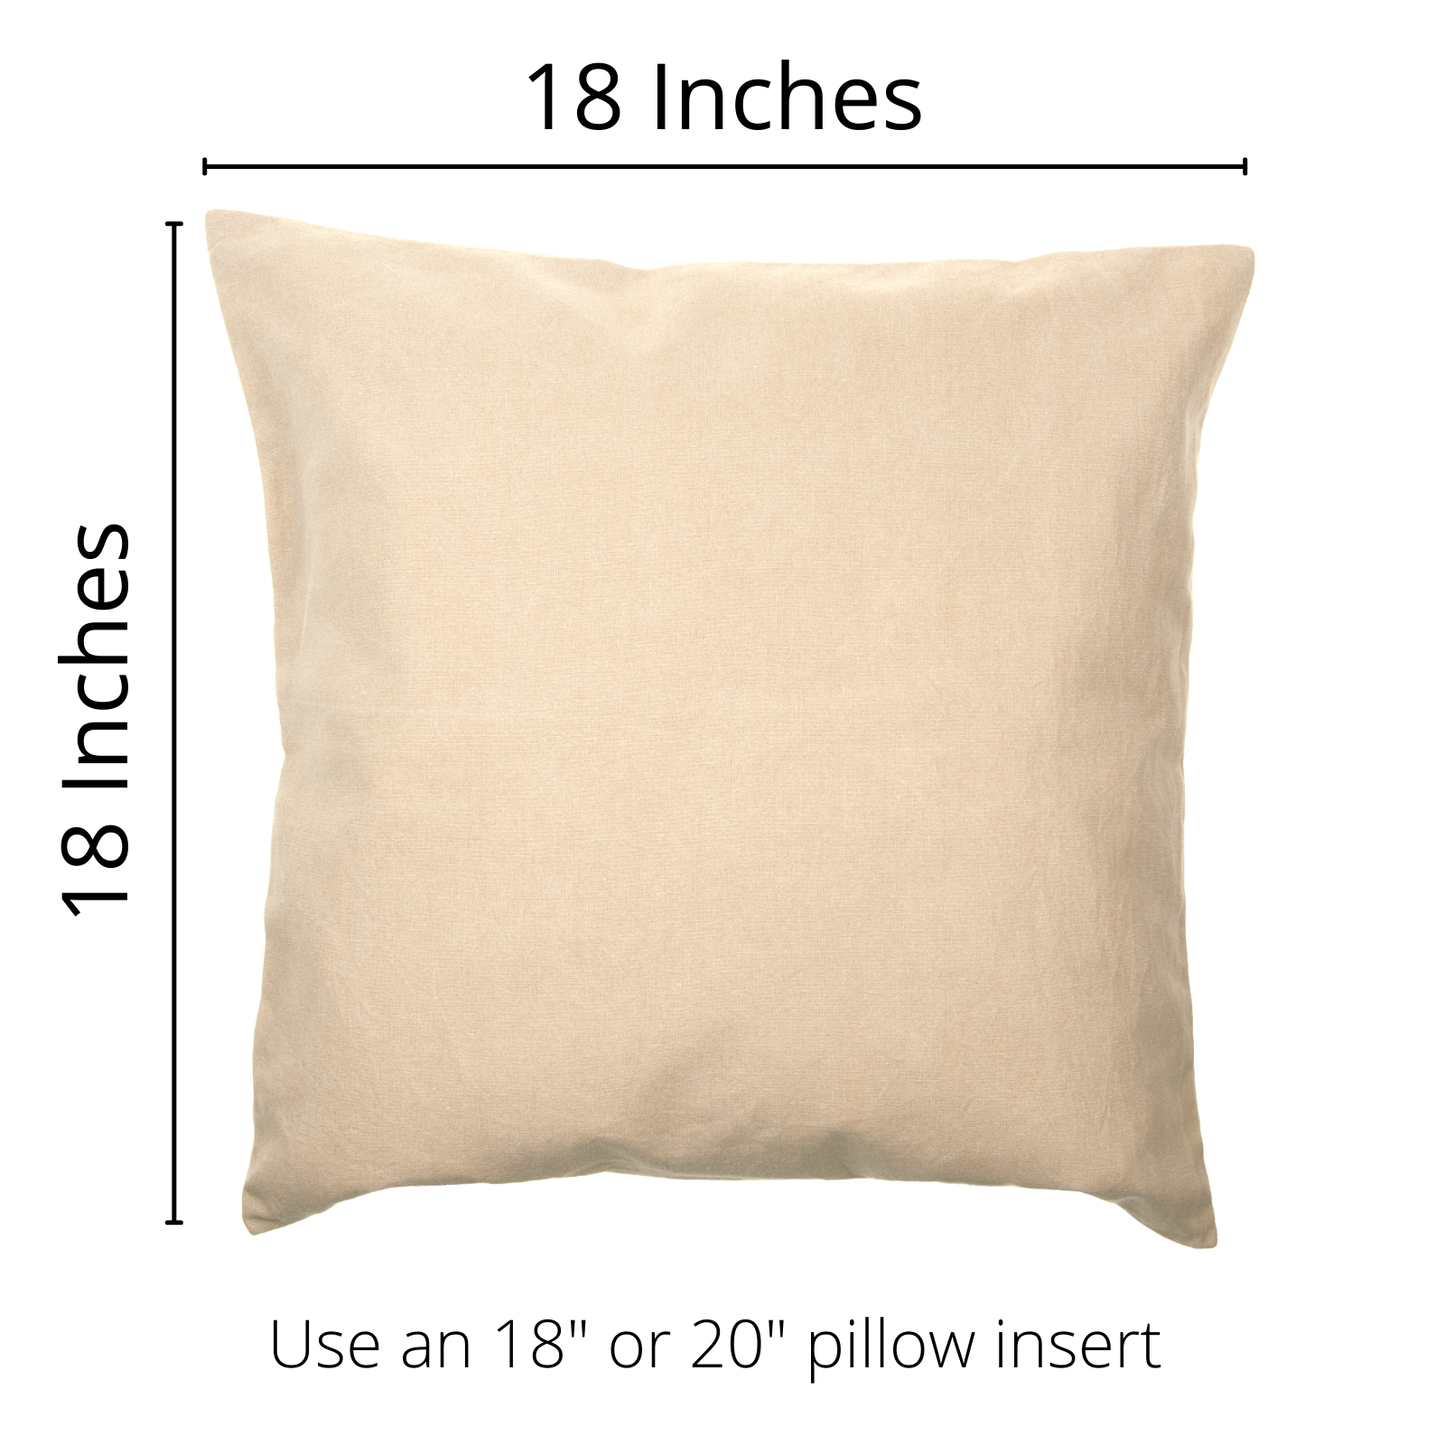 1776 Pillow Cover